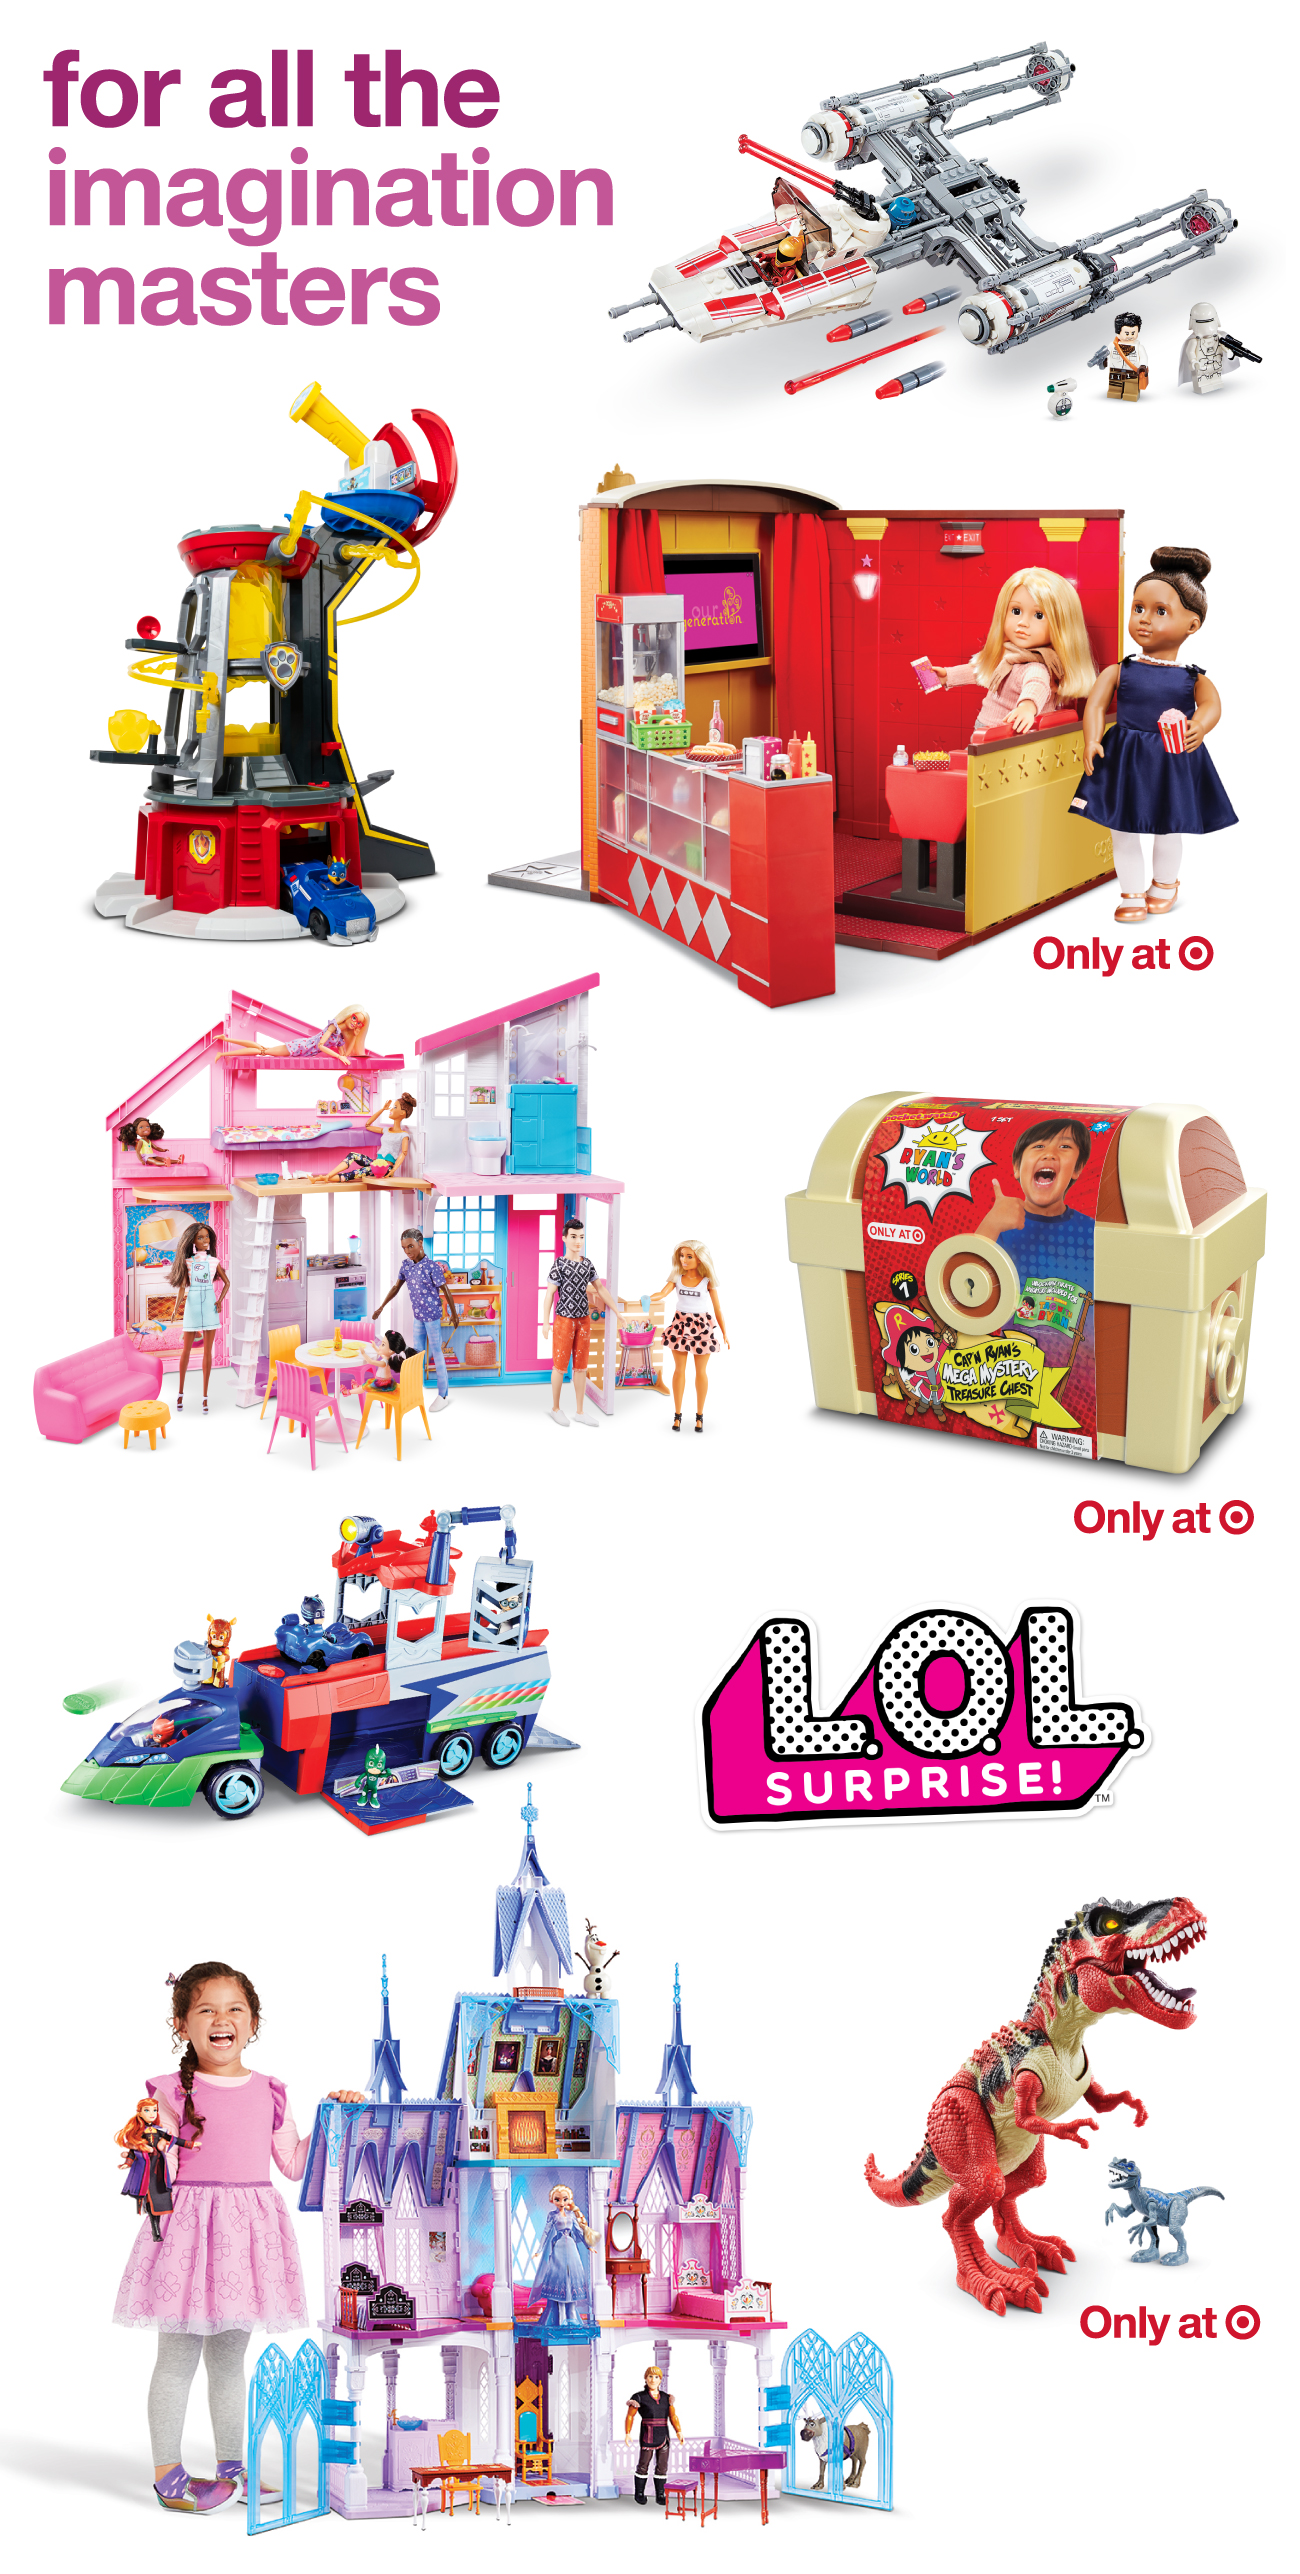 A collage of imagination toys